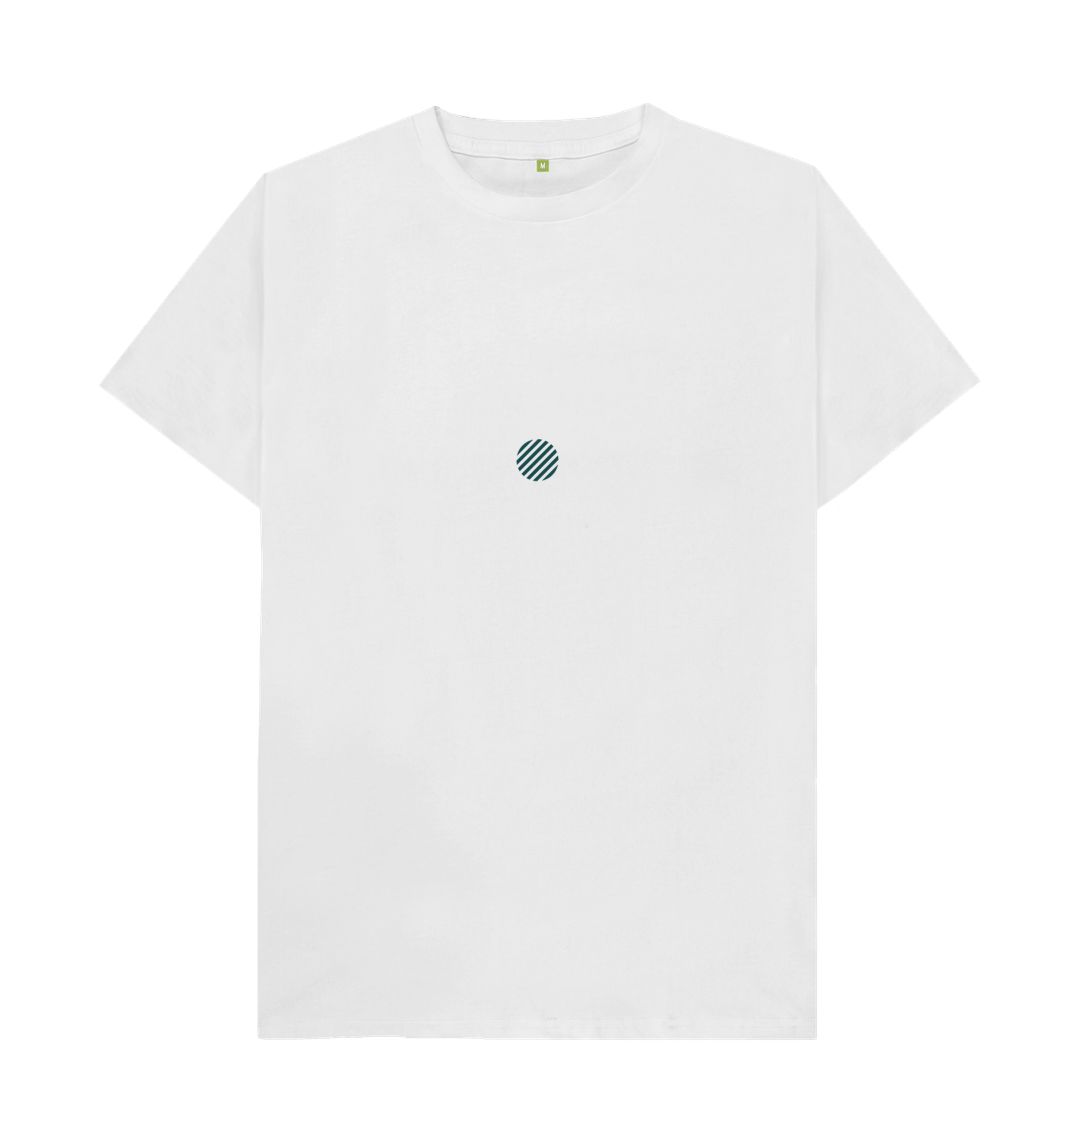 Primary Teal Logo Small